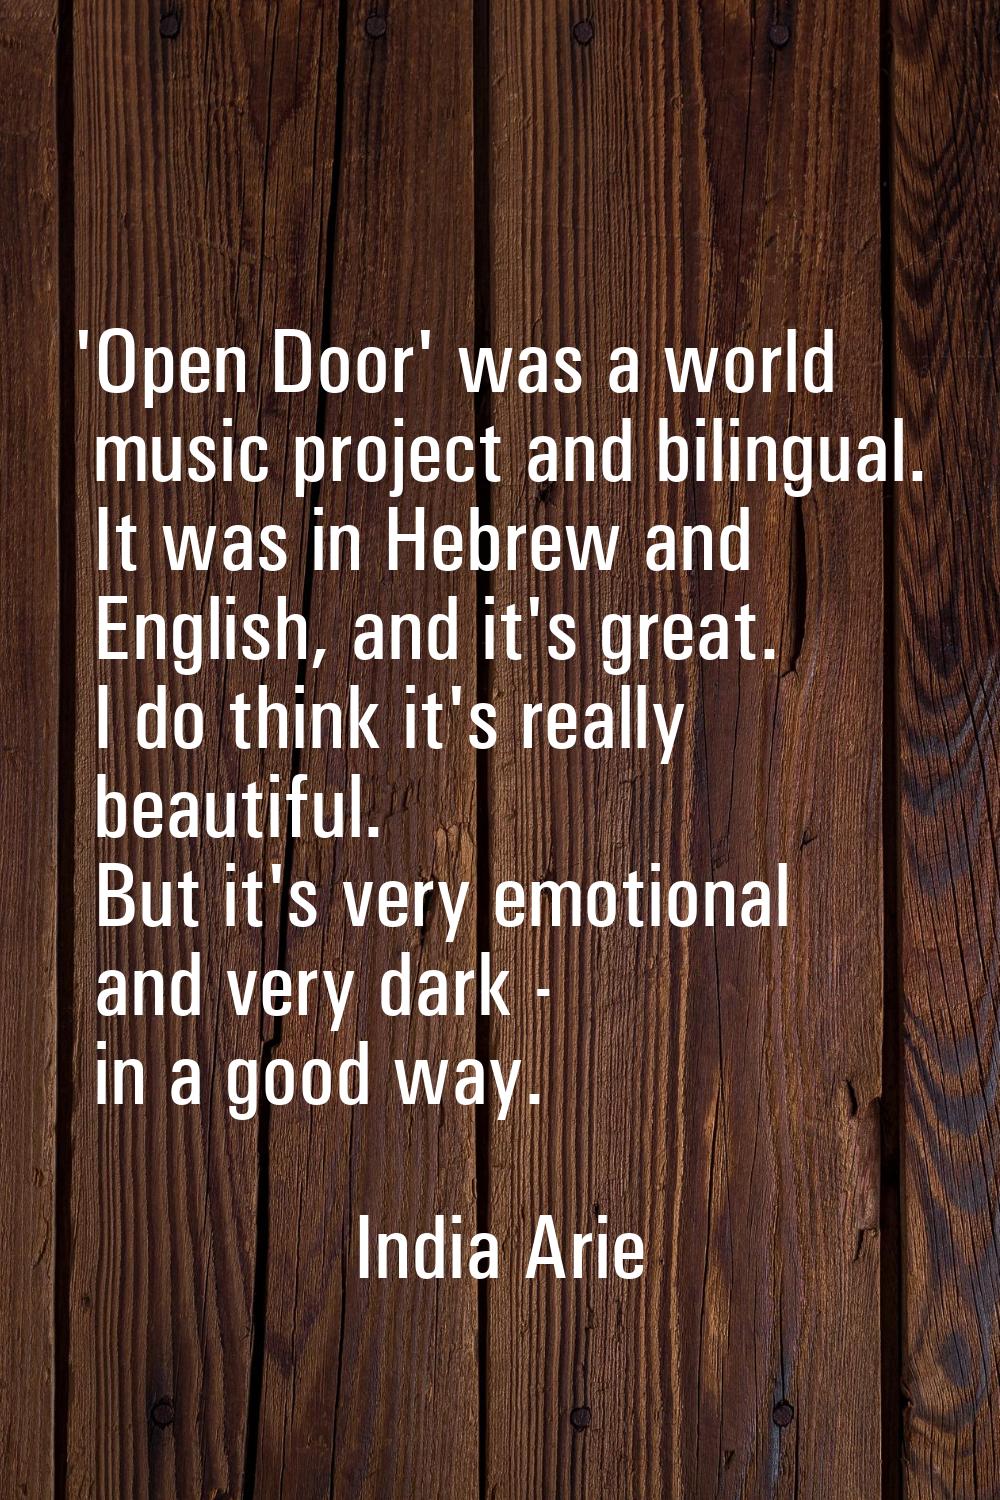 'Open Door' was a world music project and bilingual. It was in Hebrew and English, and it's great. 